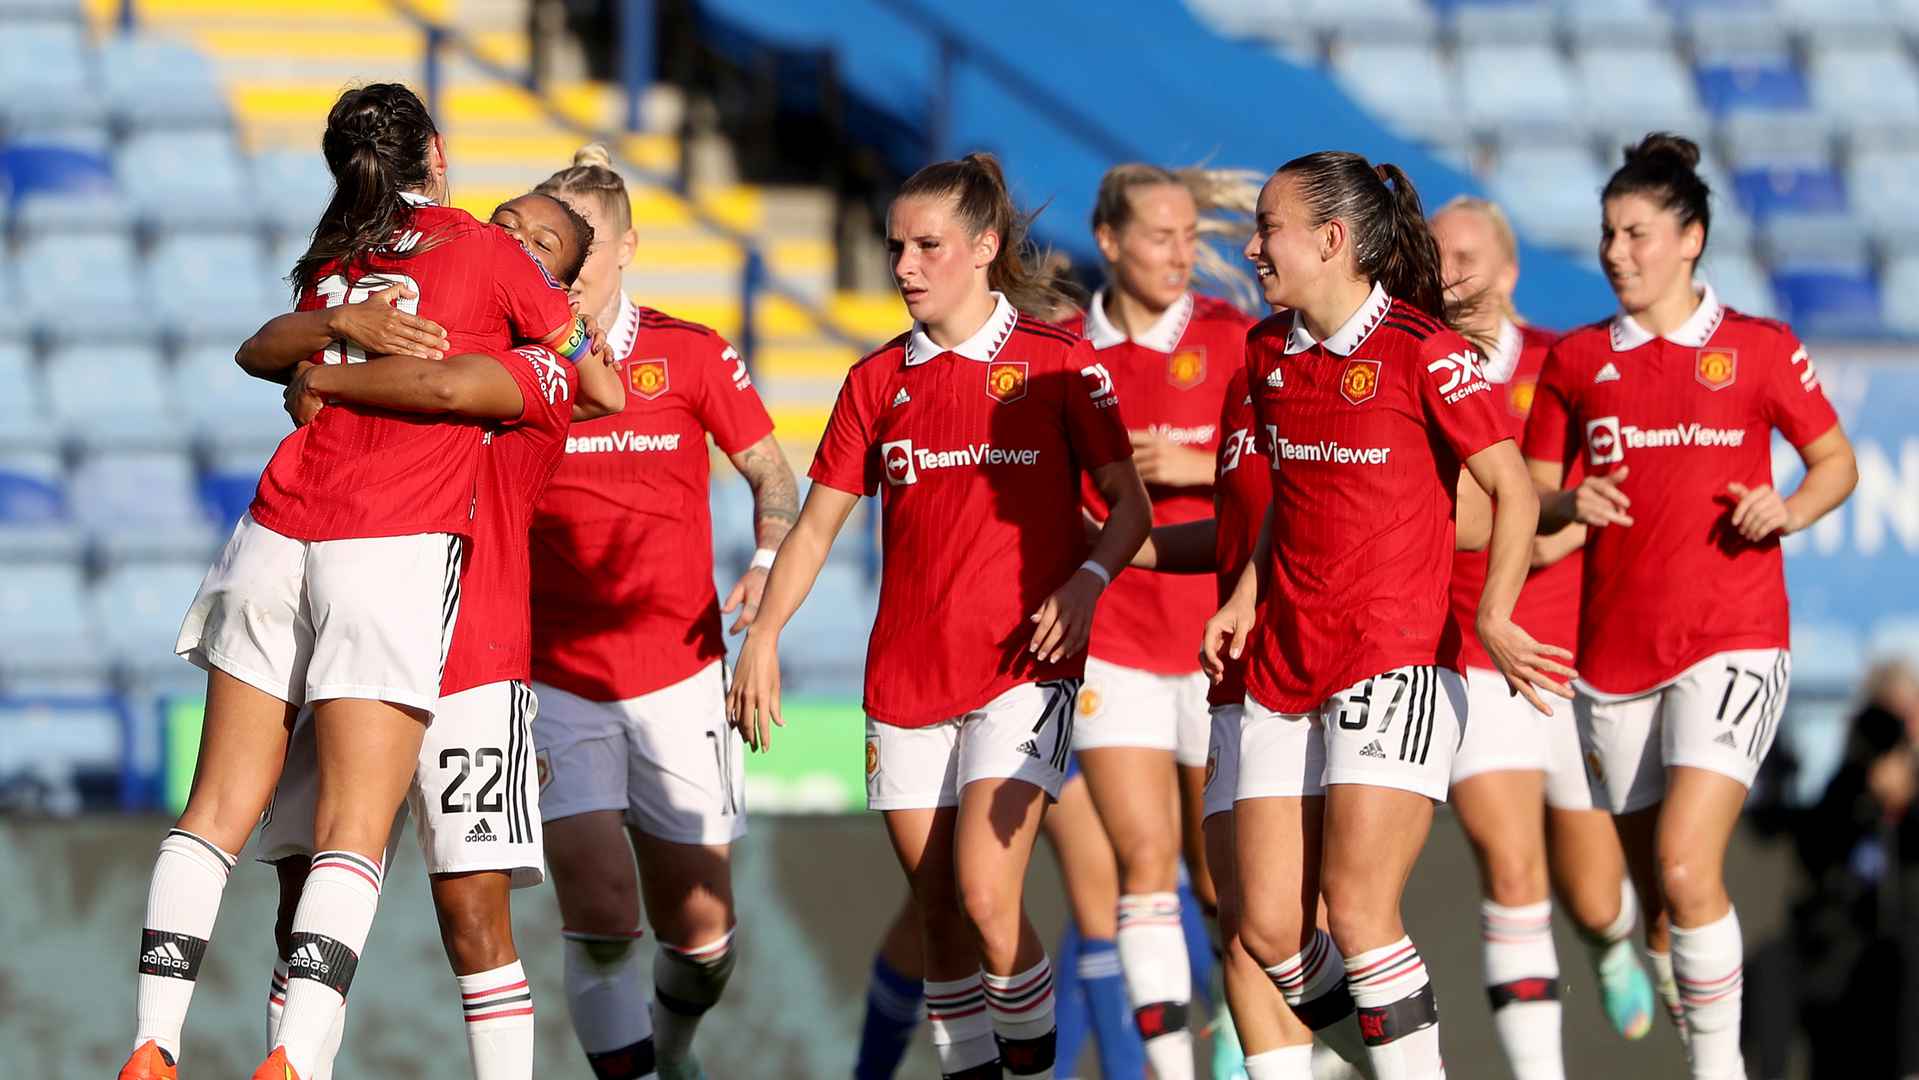 Match preview, TV channel and live stream details for Durham v Man Utd Women Continental Cup 26 October 2022 Manchester United